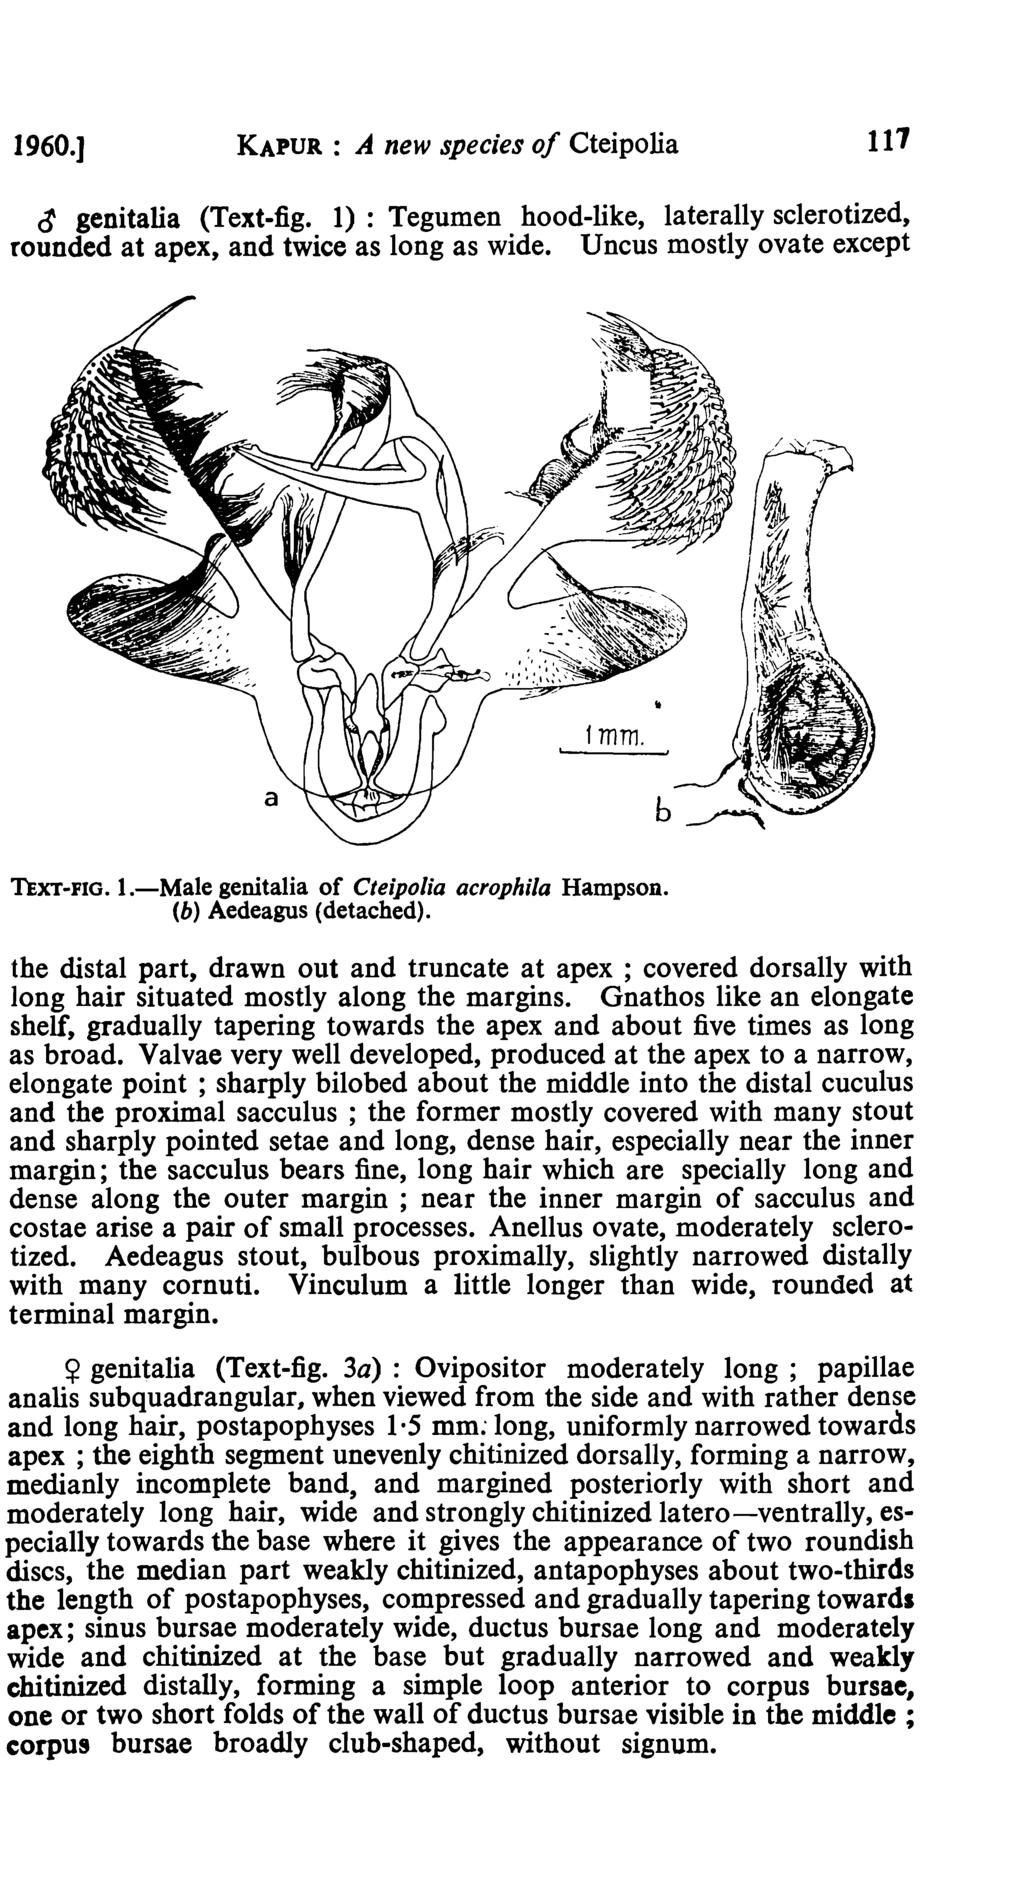 1960.] KAPUR : A new species of Cteipolia 117 ~ genitalia (Text-fig. 1): Tegumen hood-like, laterally sclerotized, rounded at apex, and twice as long as wide. Uncus mostly ovate except fmm. TEXT-FIG.